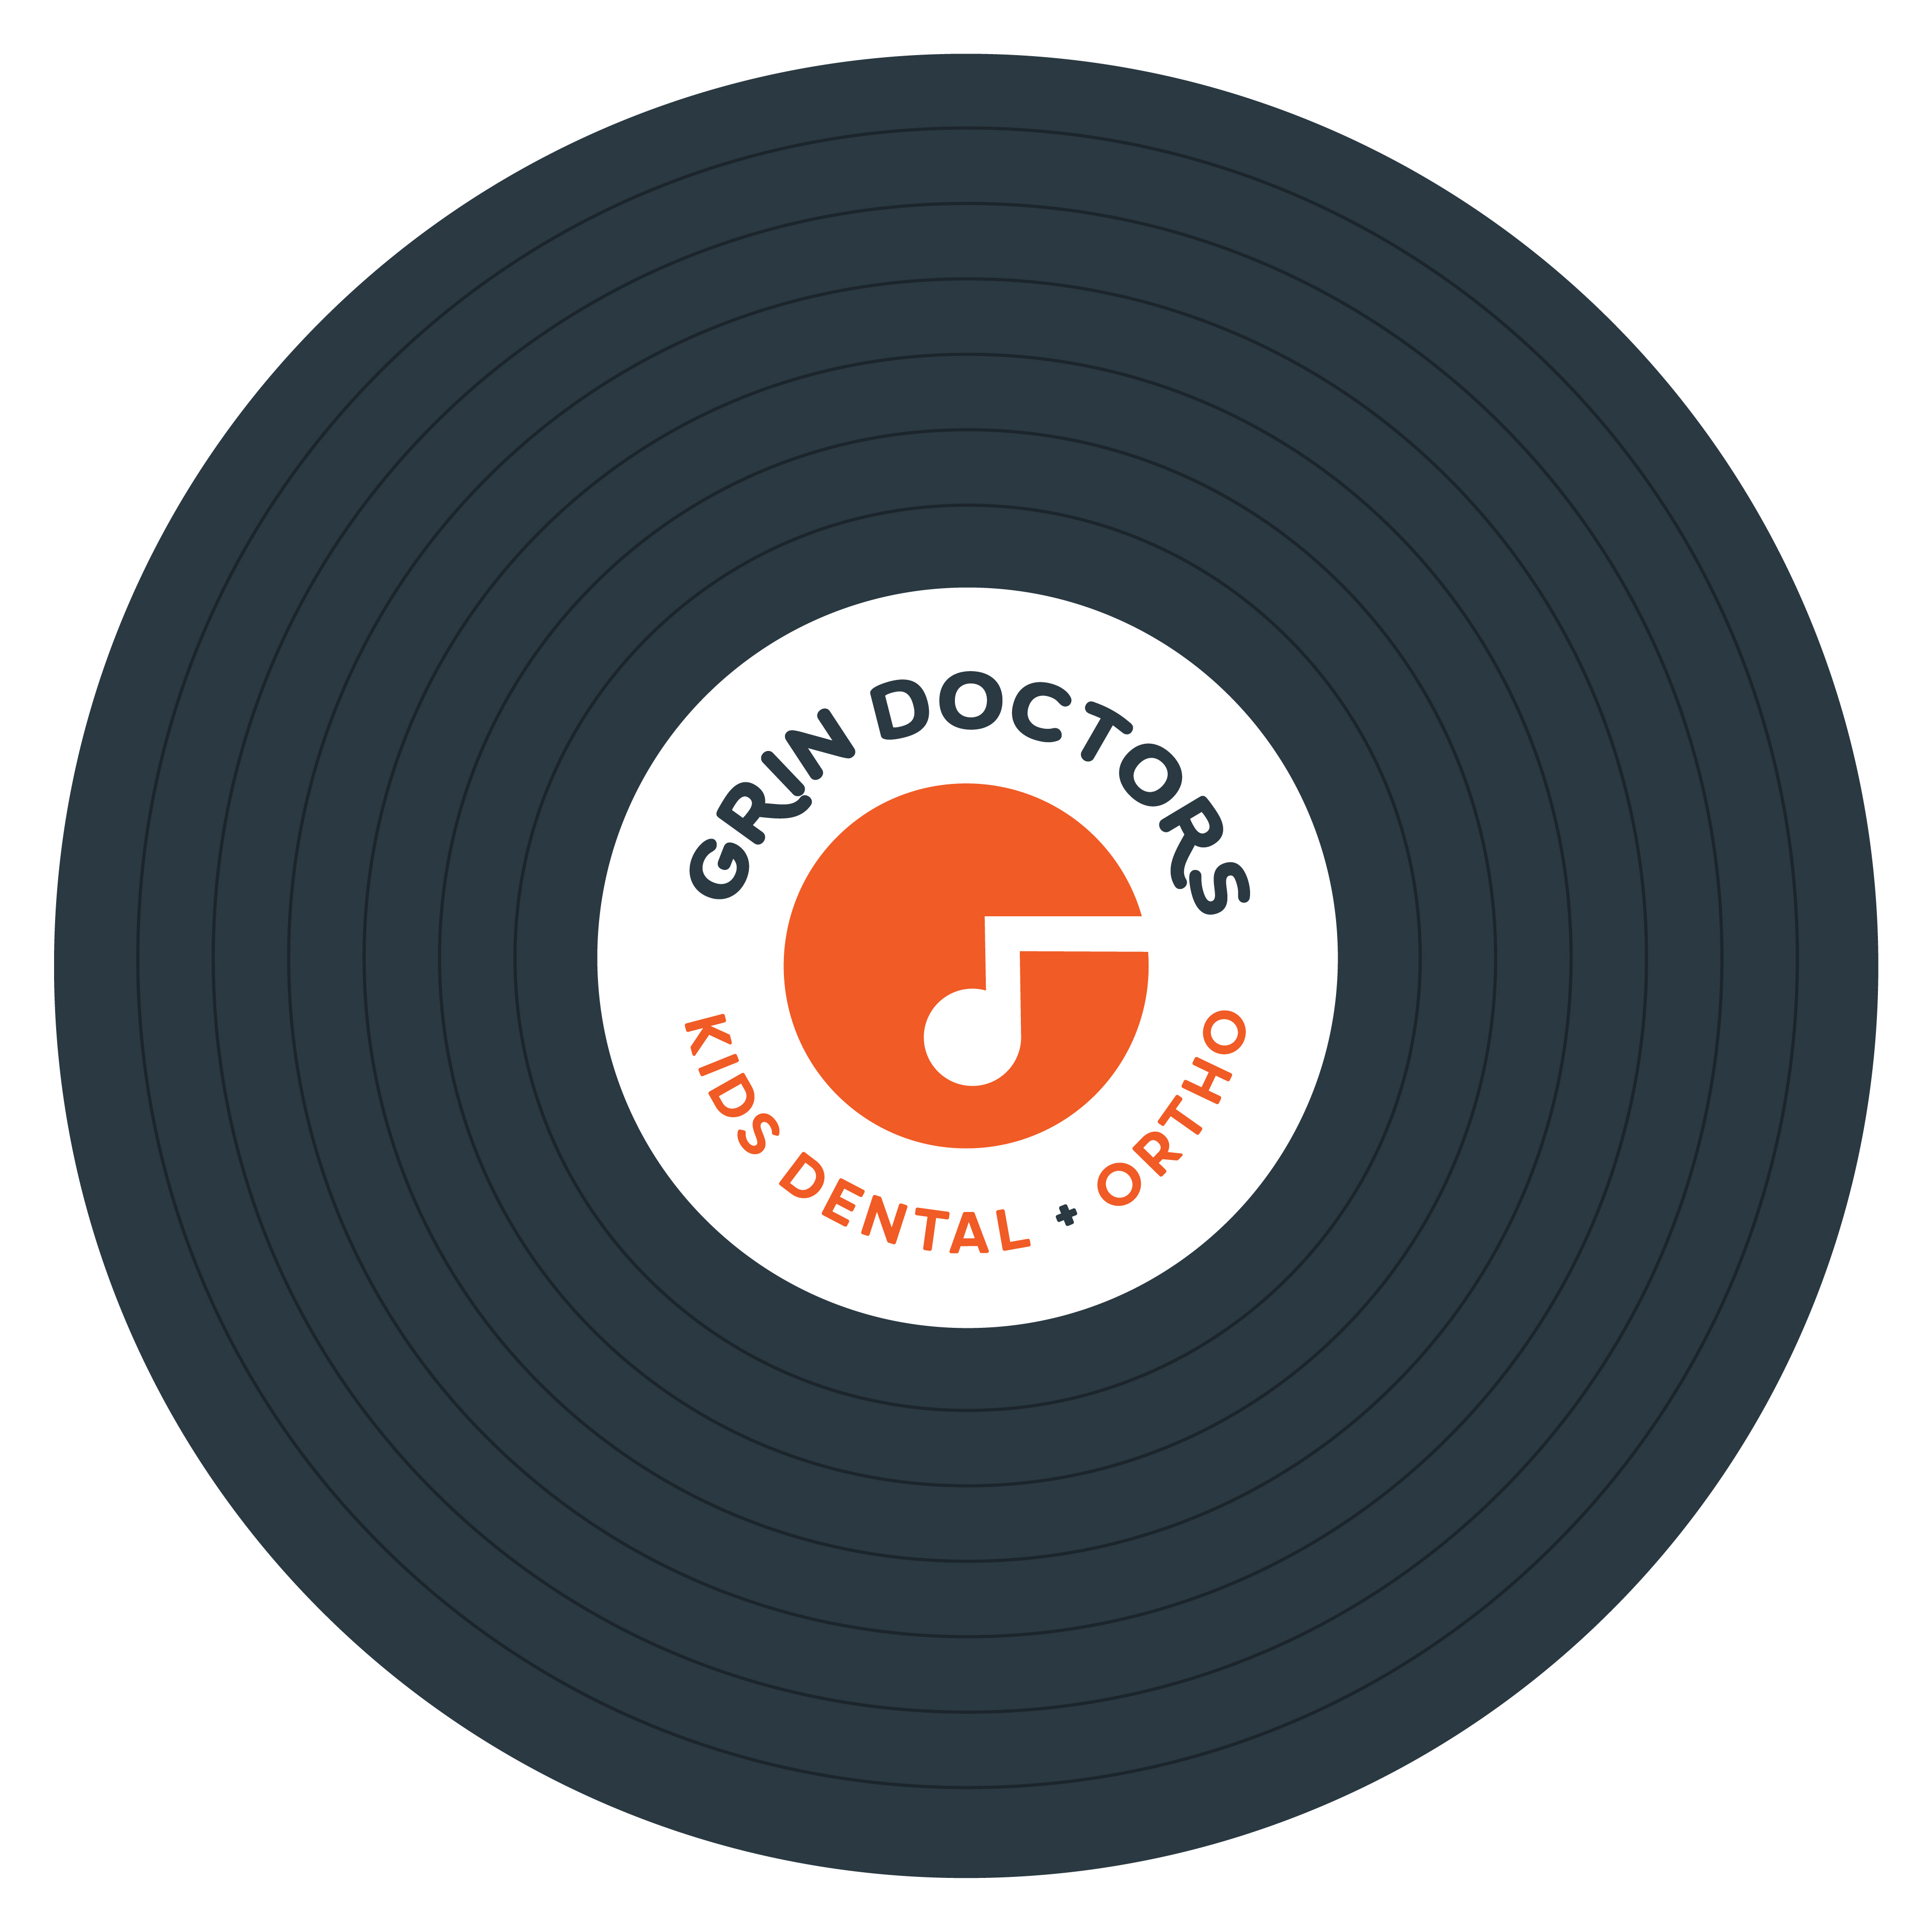 Grin Doctors logo design by logo designer Test Monki for your inspiration and for the worlds largest logo competition